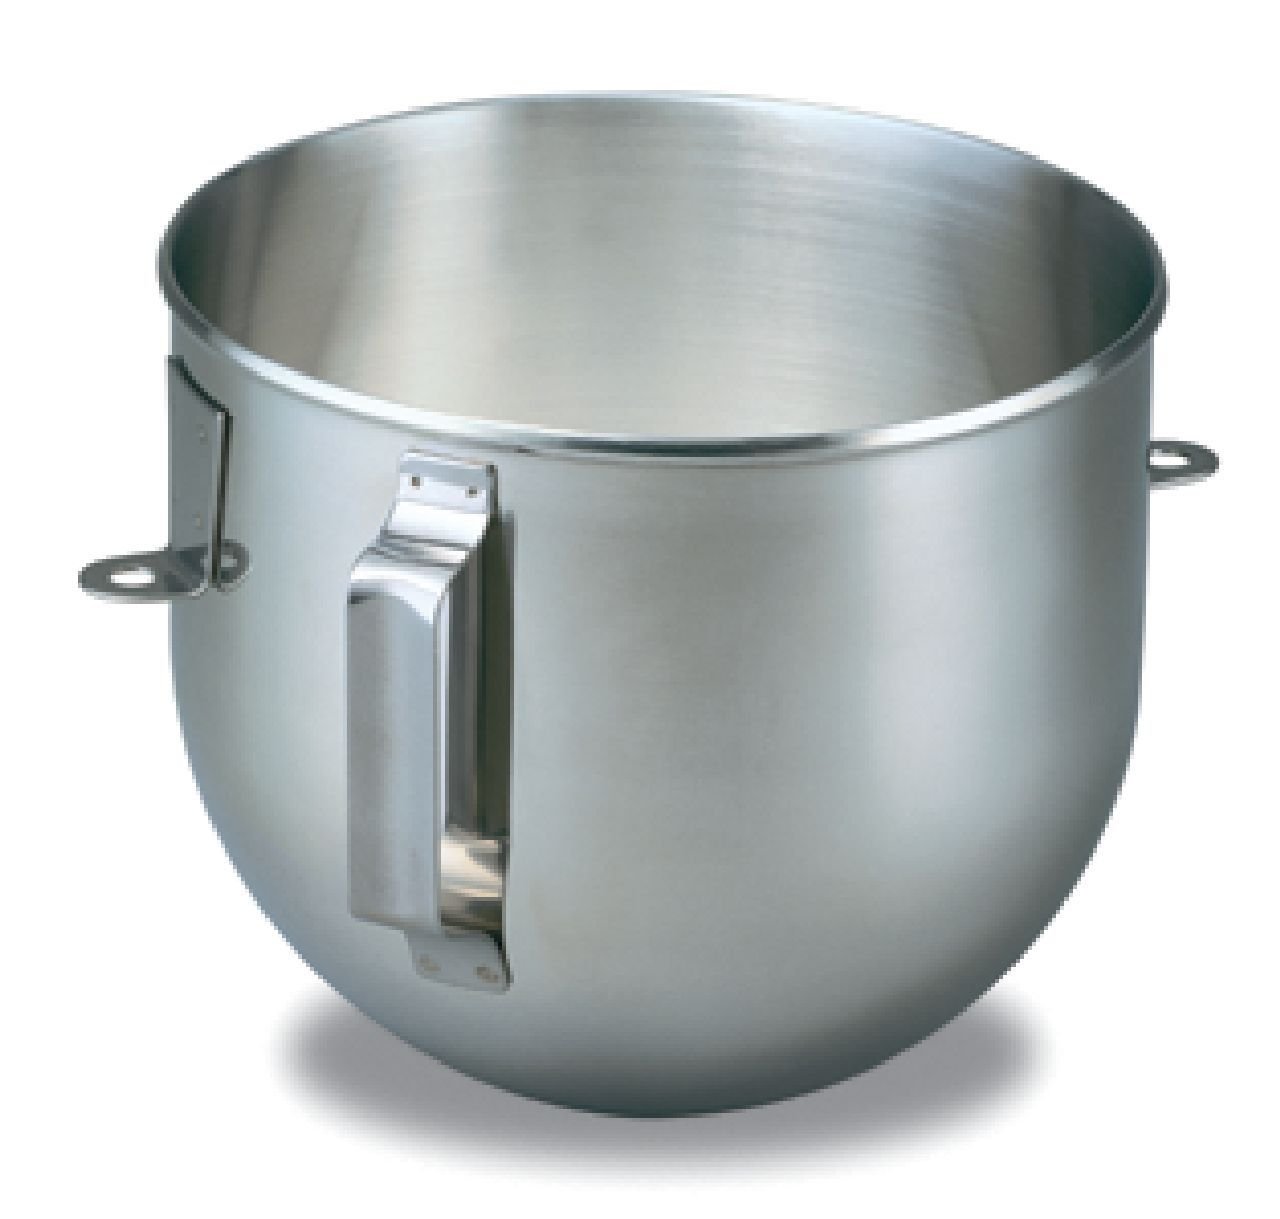 6 Quart Polished Stainless Steel Bowl for select KitchenAid® Bowl